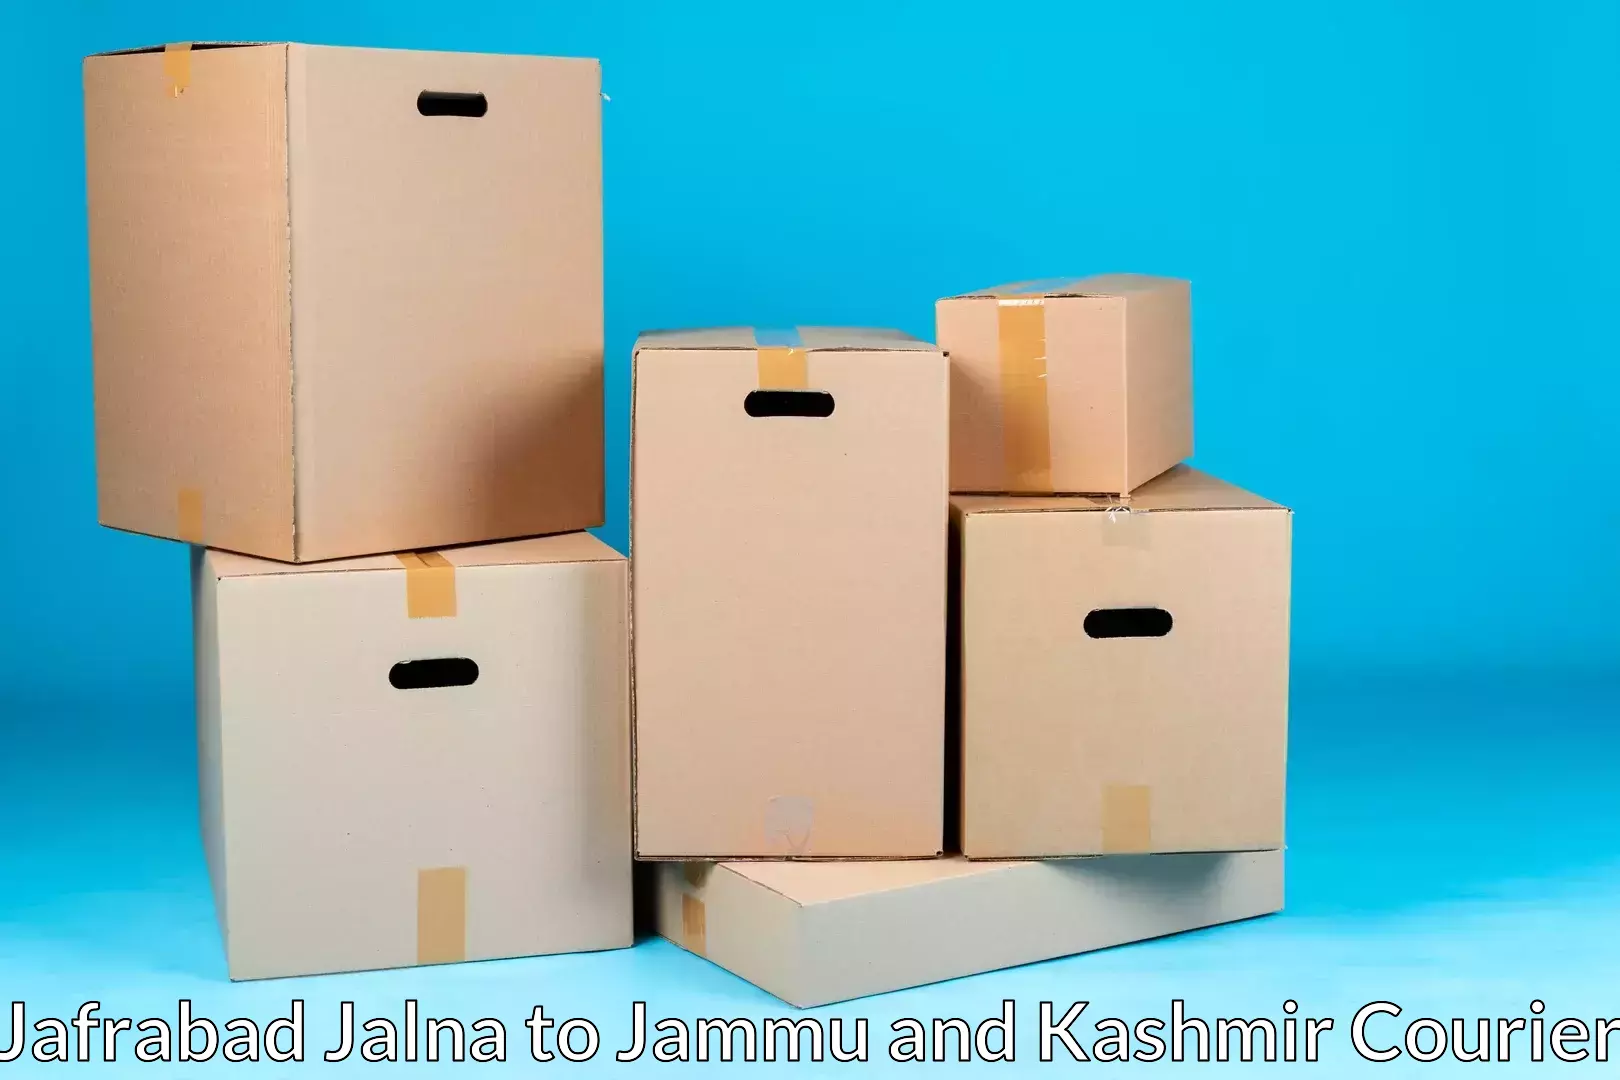 Trusted household movers Jafrabad Jalna to Baramulla